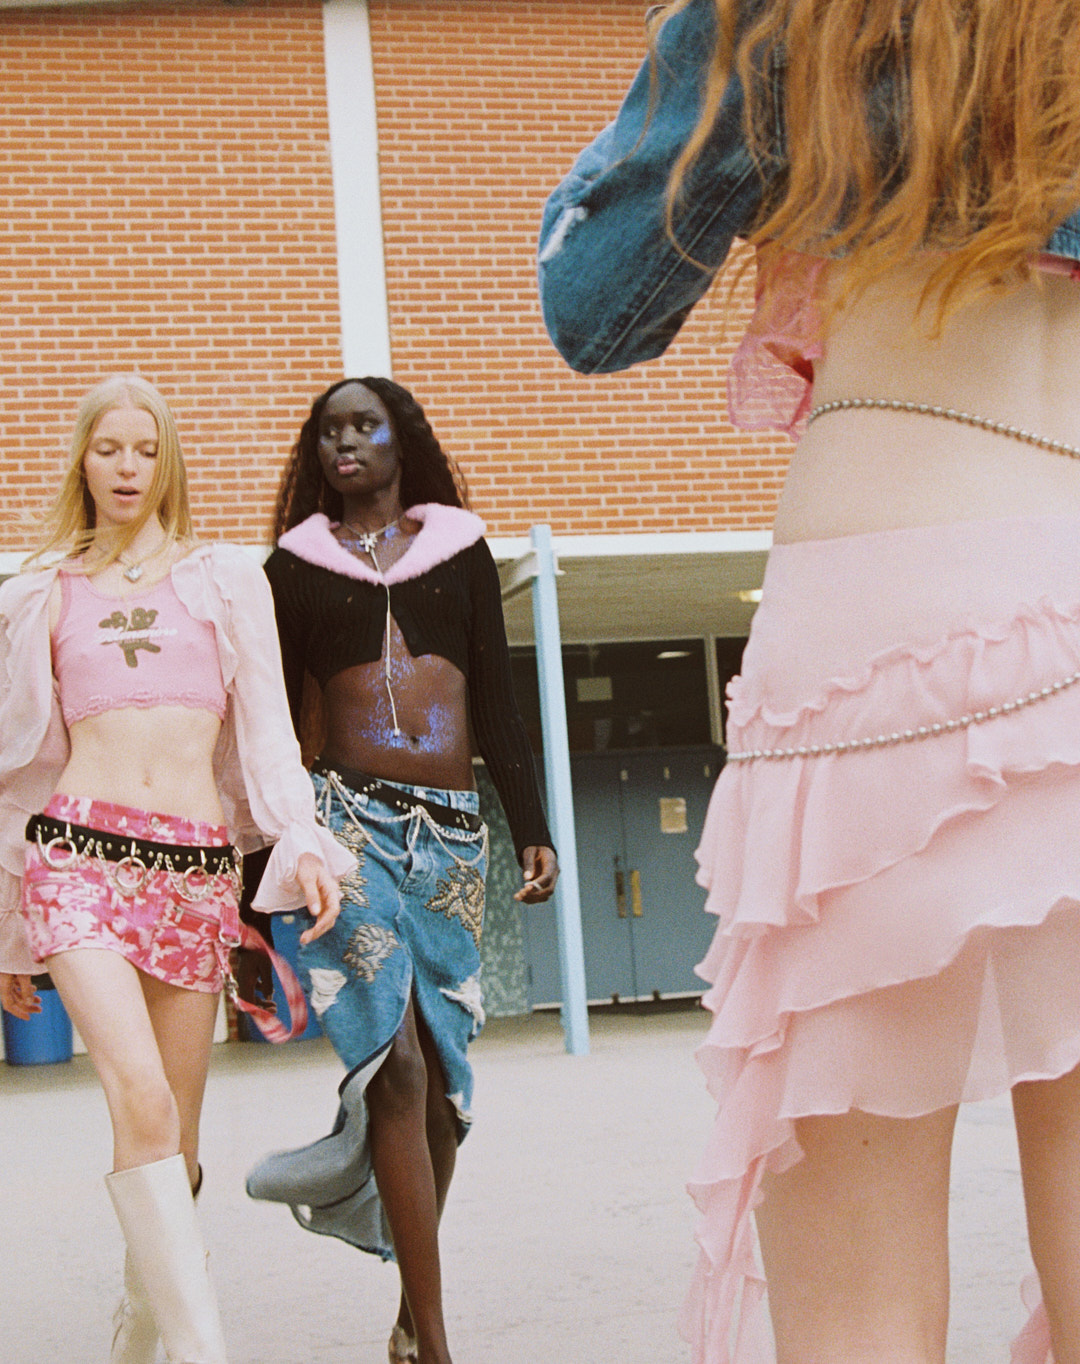 Blumarine x Heaven by Marc Jacobs Is 'Mean Girls' Meets Mall Goth